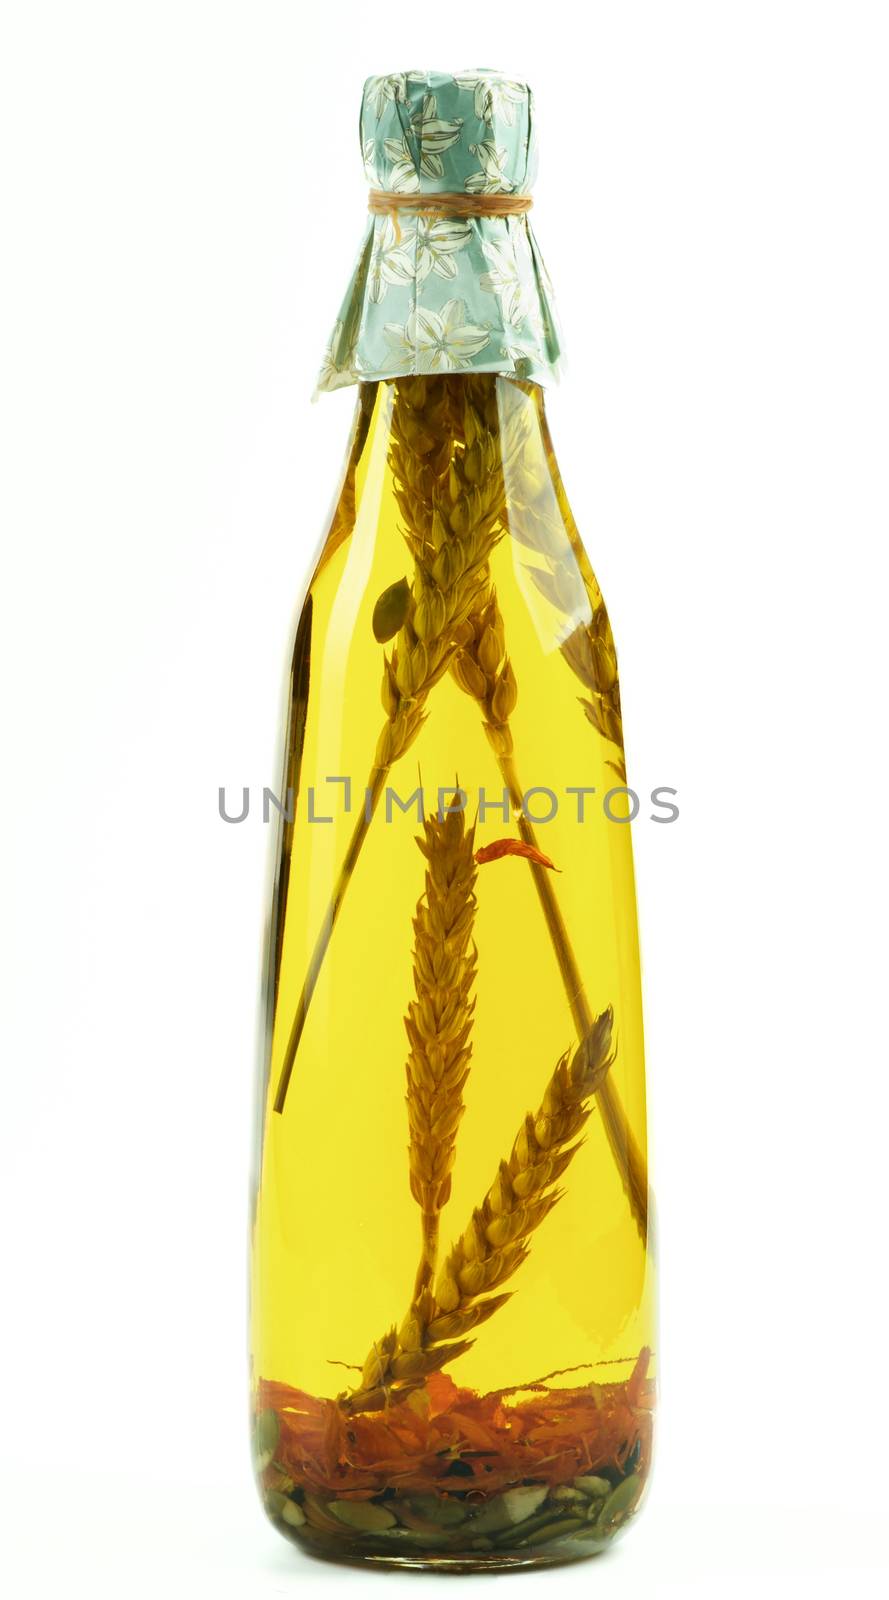 Olive Oil with Stems of Cereals by zhekos